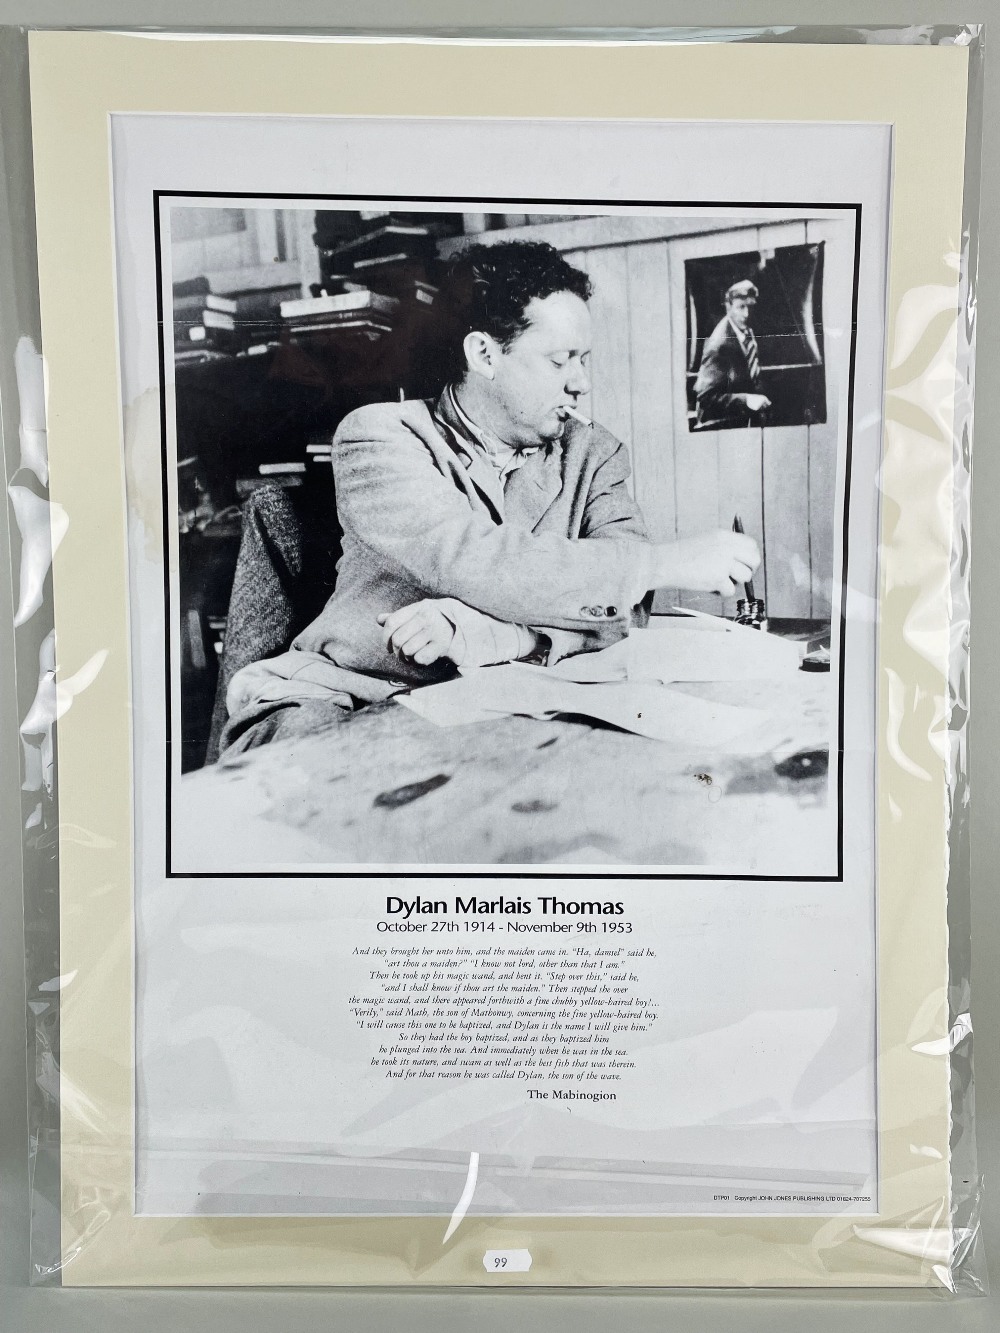 LEE MILLER / JOHN DEAKIN / UNKNOWN Dylan Thomas photographic posters - Image 2 of 4